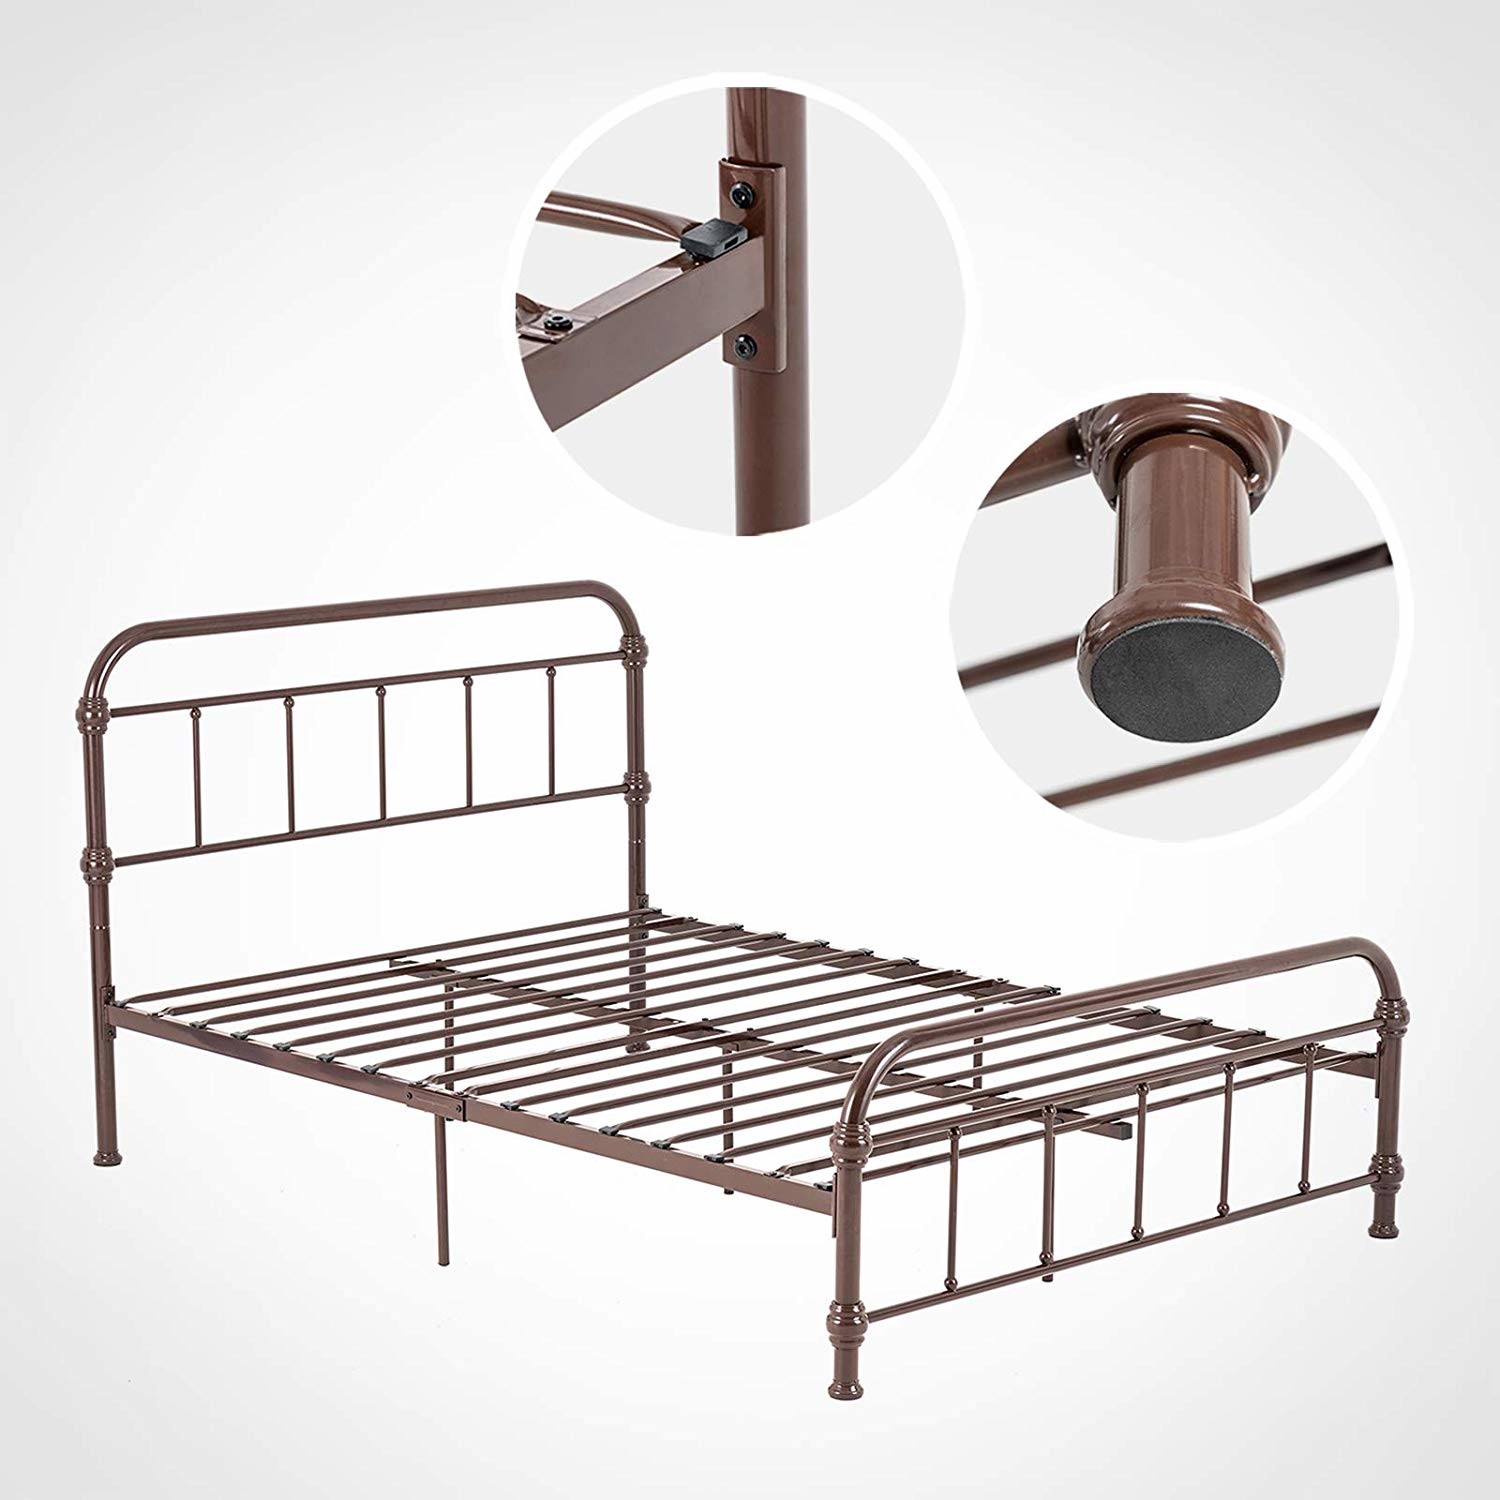 Durable Steel Furniture Bed Heavy Duty Reinforce Frame For Dormitory